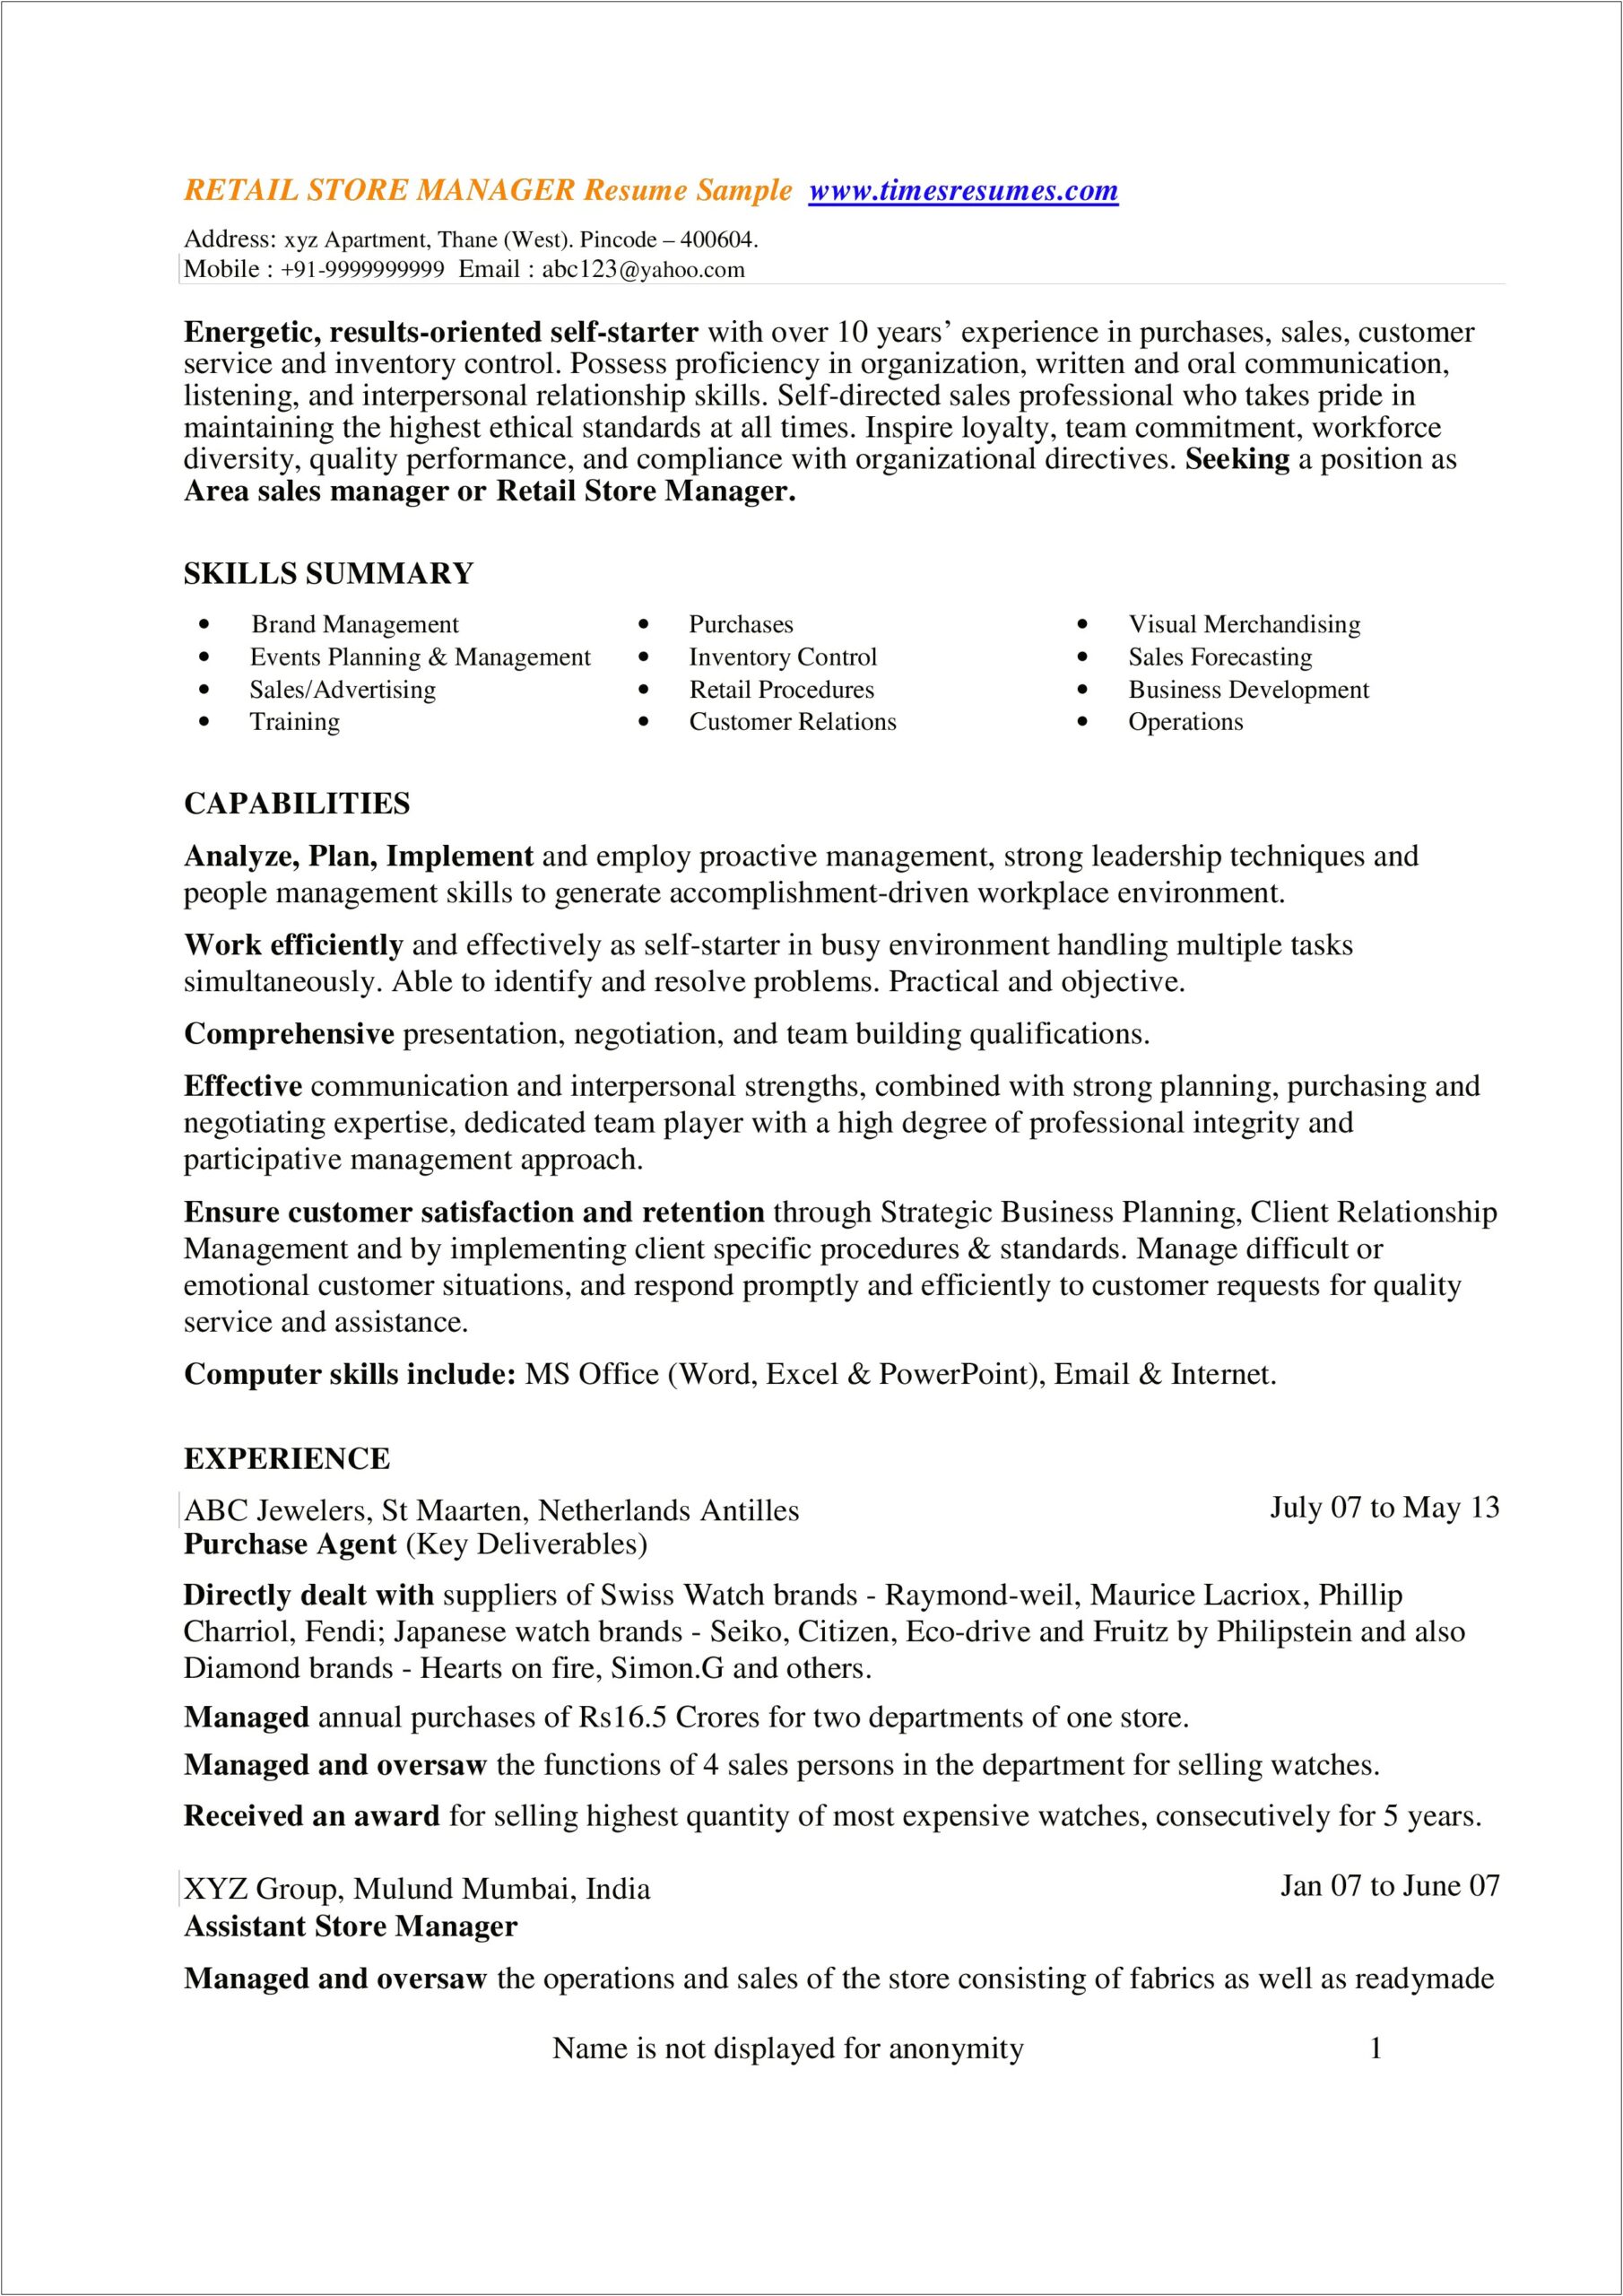 Sample Manager Resume In Word Format